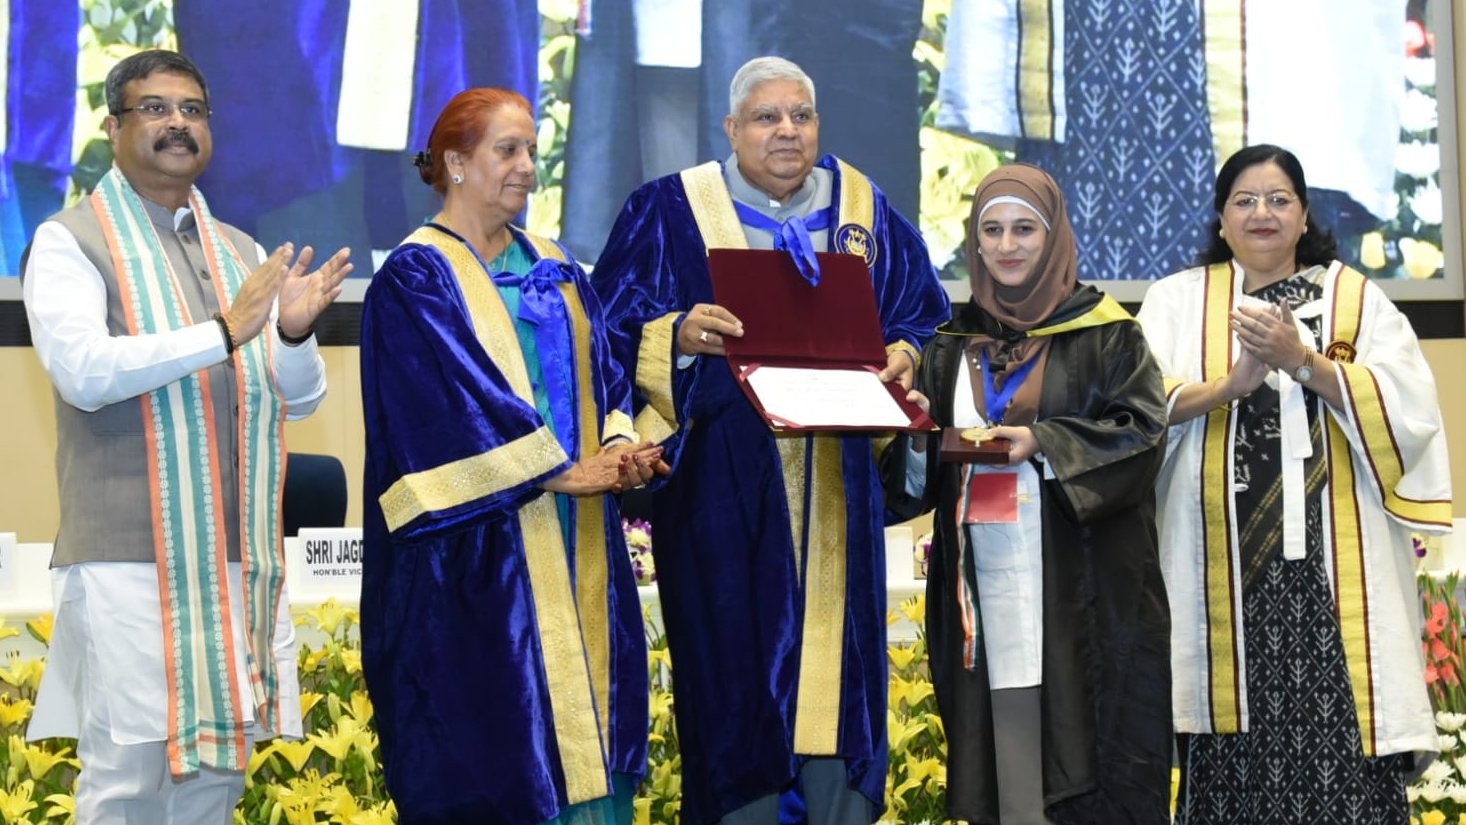 The Vice President, Shri Jagdeep Dhankhar conferred gold medals to meritorious students of Jamia Millia Islamia during the centenary year convocation of the University at Vigyan Bhawan in New Delhi on July 23, 2023.